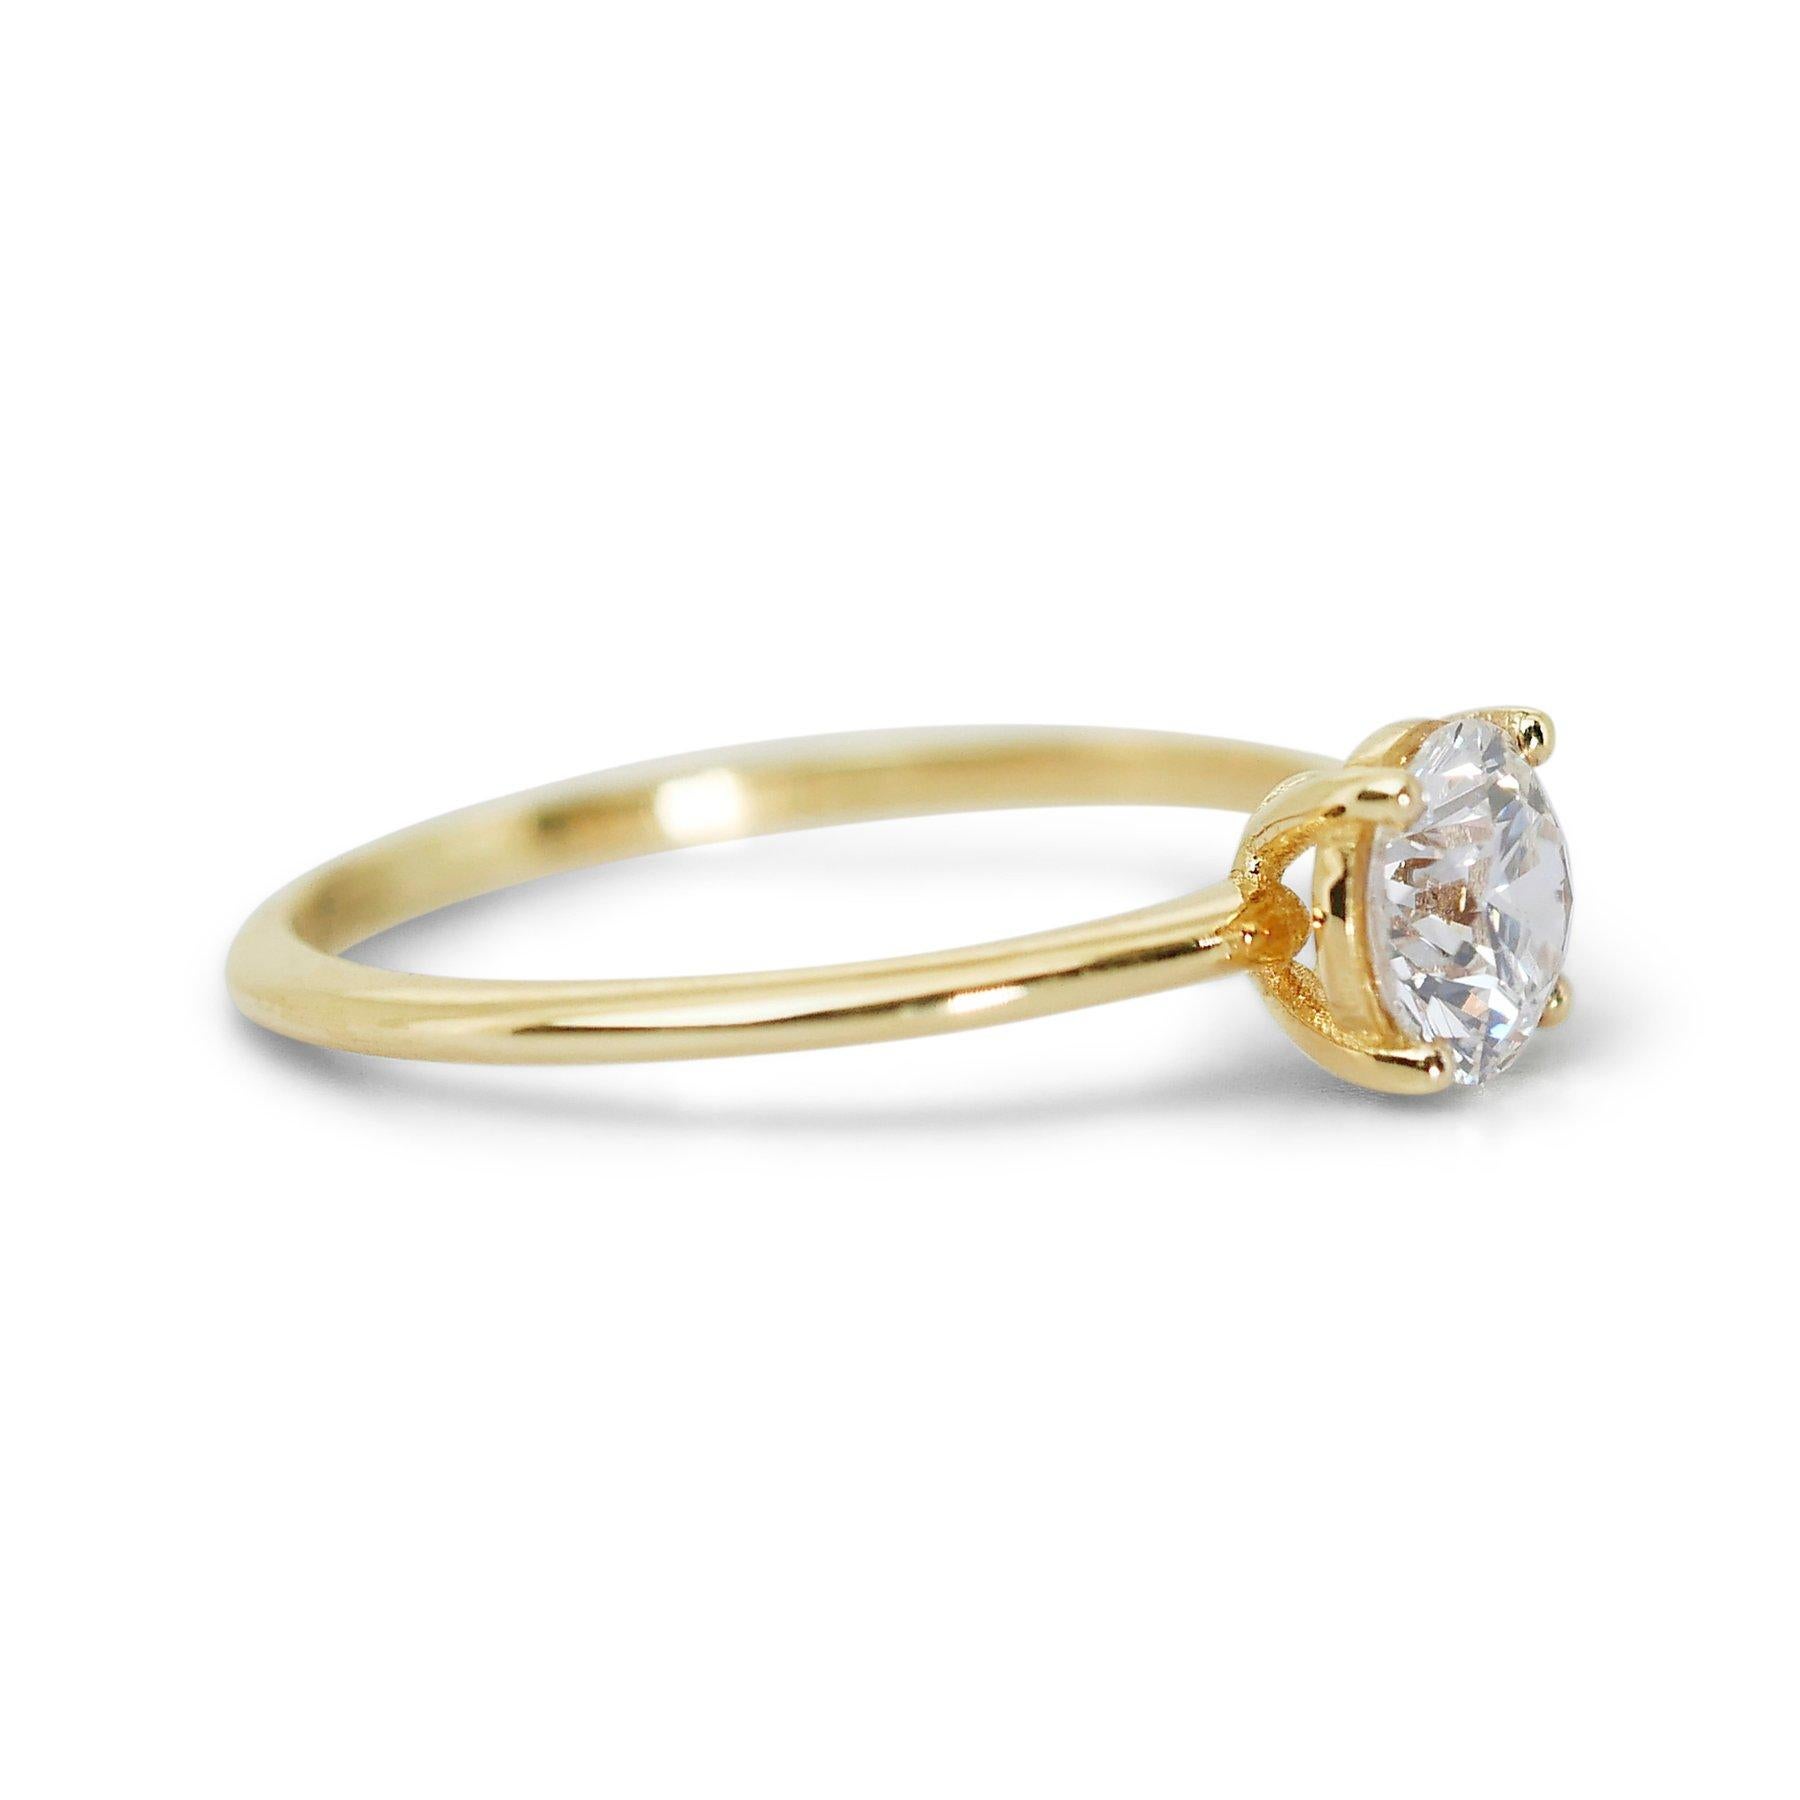 Unveiling a truly enchanting piece of solitaire ring that seamlessly blends grace and sophistication. The focal point of this exquisite adornment is a mesmerizing ideal cut triple excellent diamond main stone, elegantly weighing 1.03 carats. The